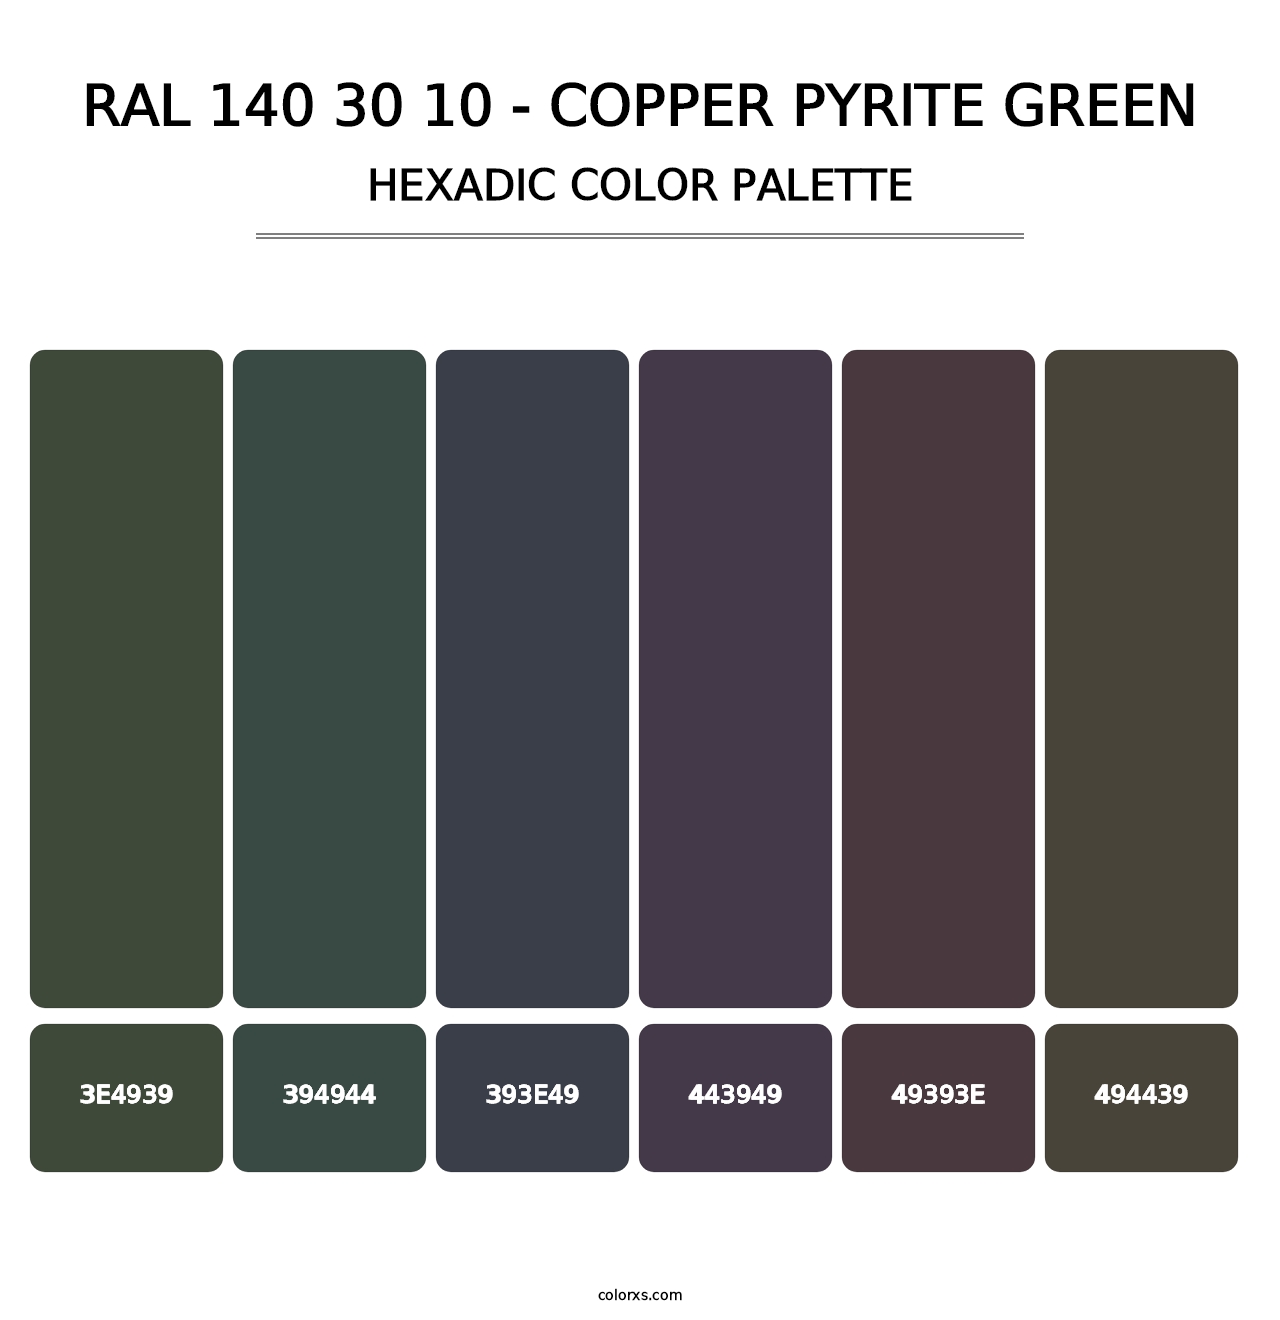 RAL 140 30 10 - Copper Pyrite Green - Hexadic Color Palette